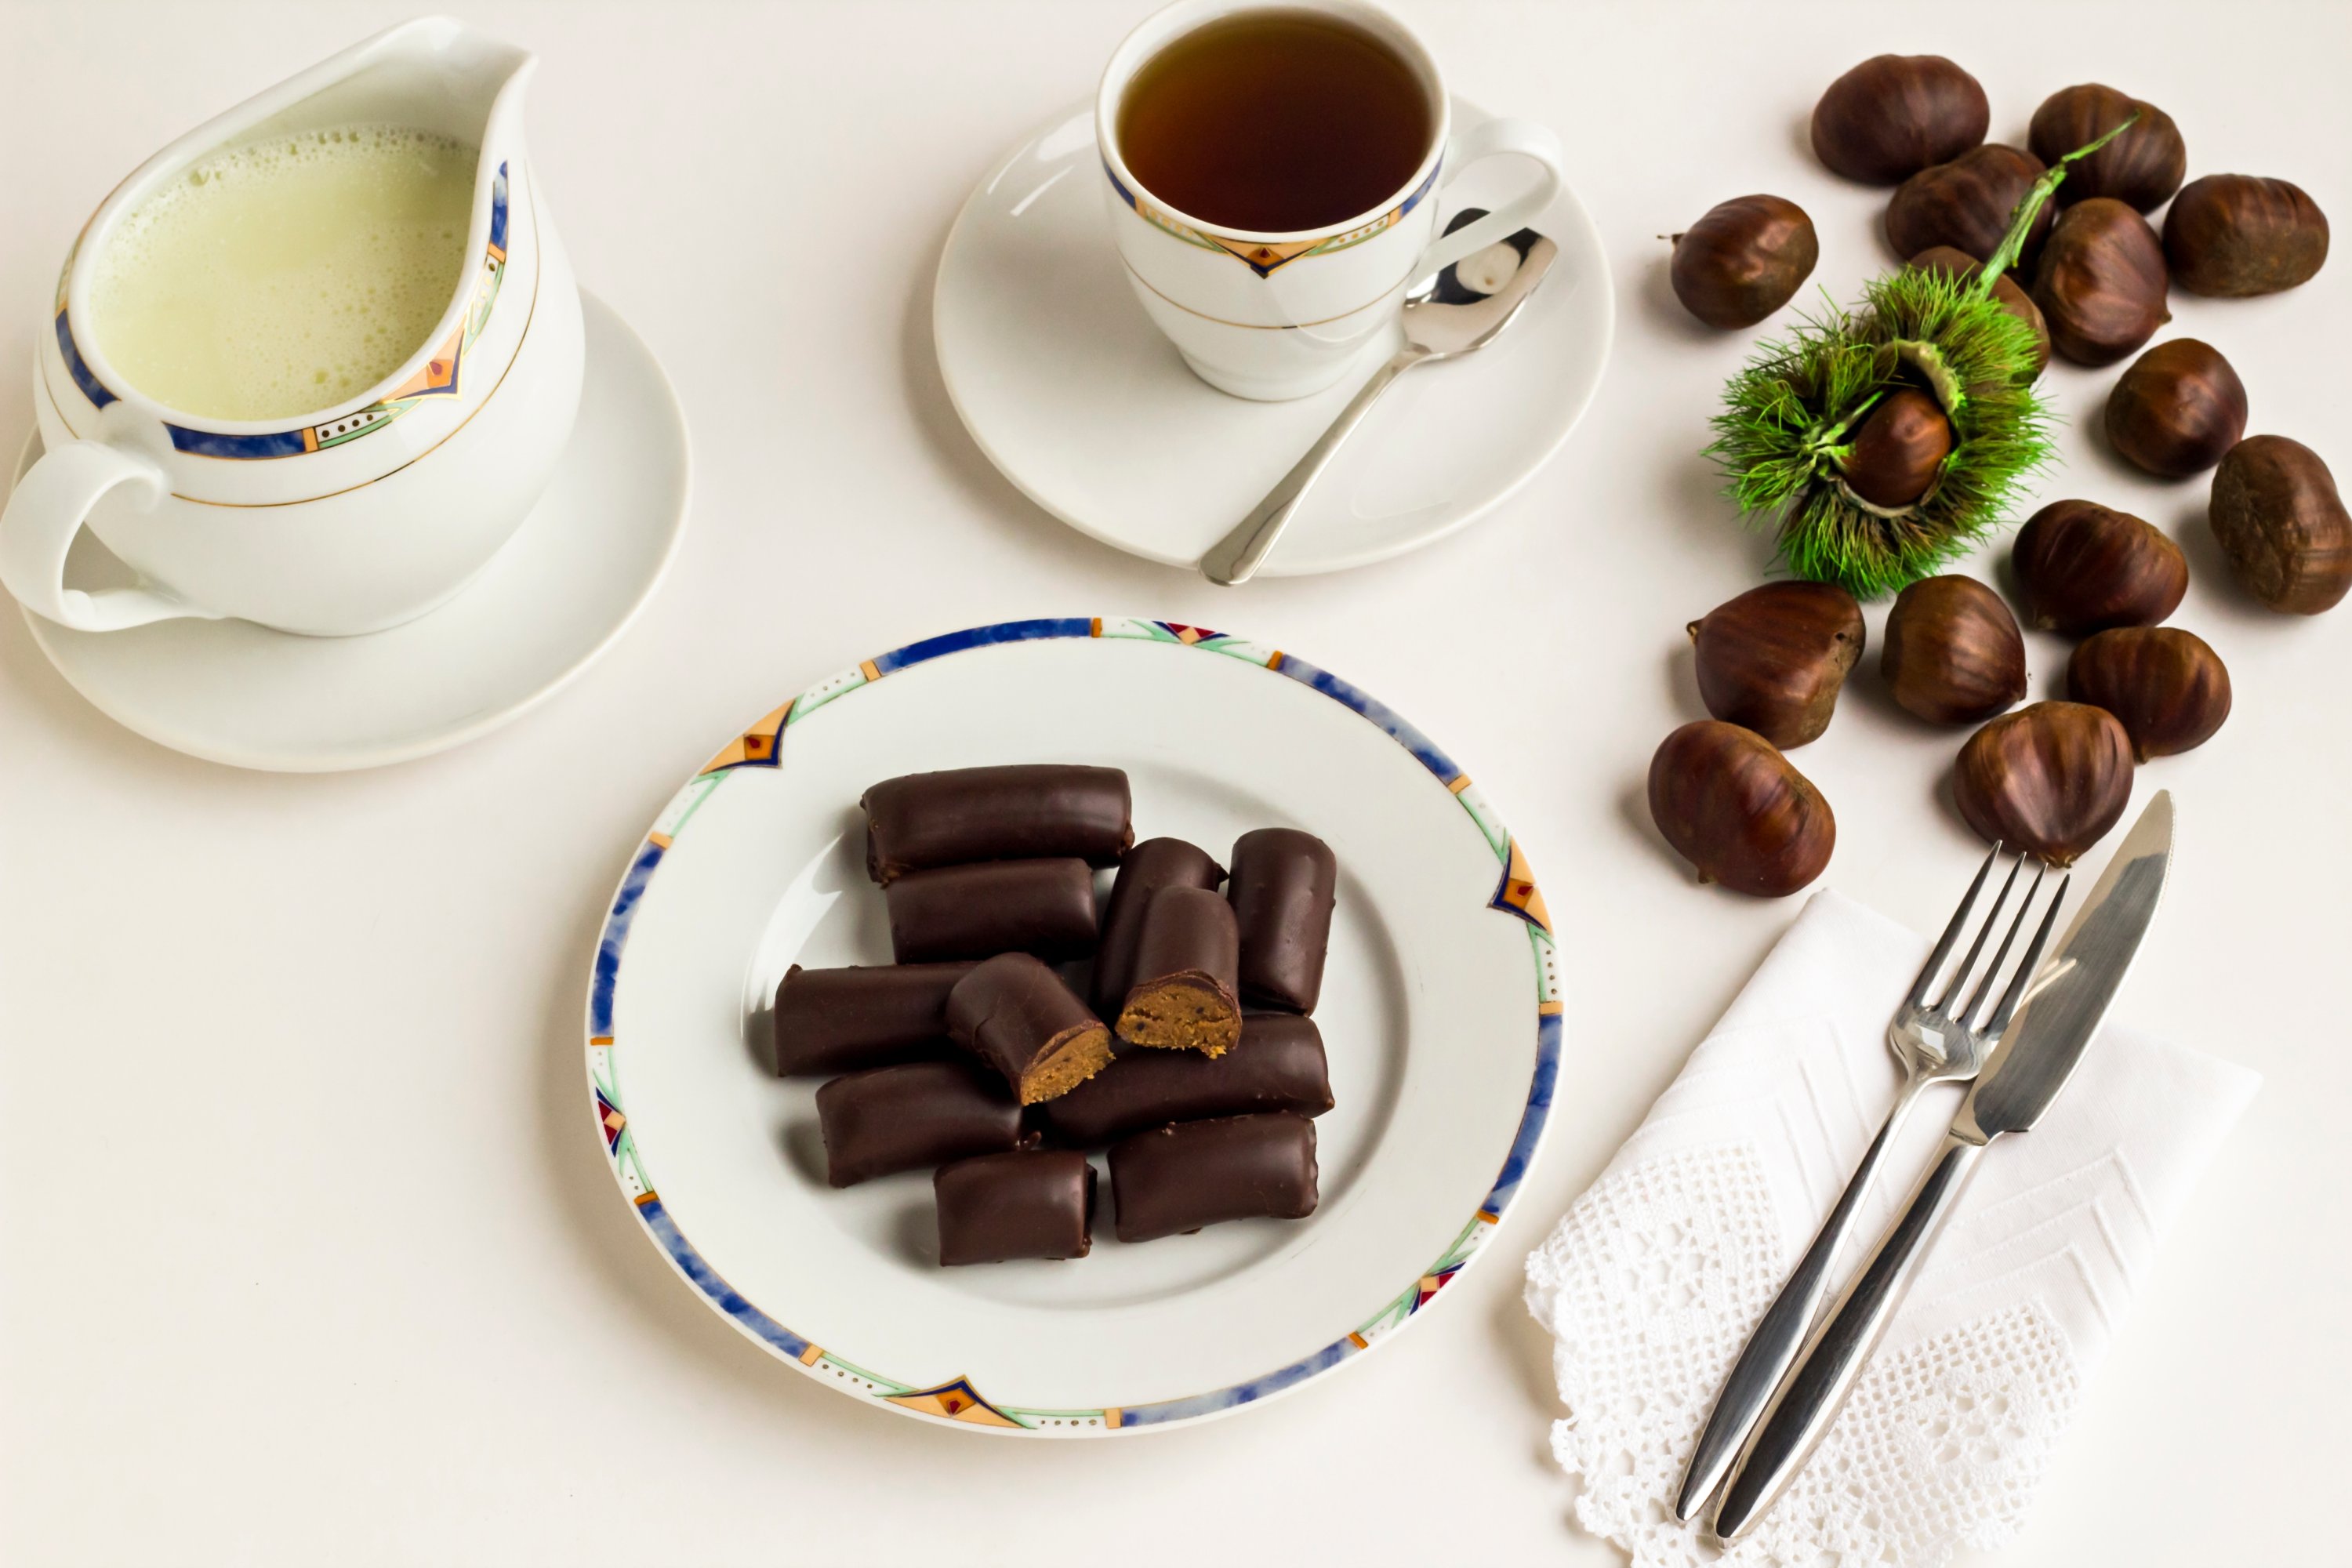 You can make your own chestnut truffles by blending chestnuts, biscuits and milk and dipping them in chocolate. (Shutterstock Photo)